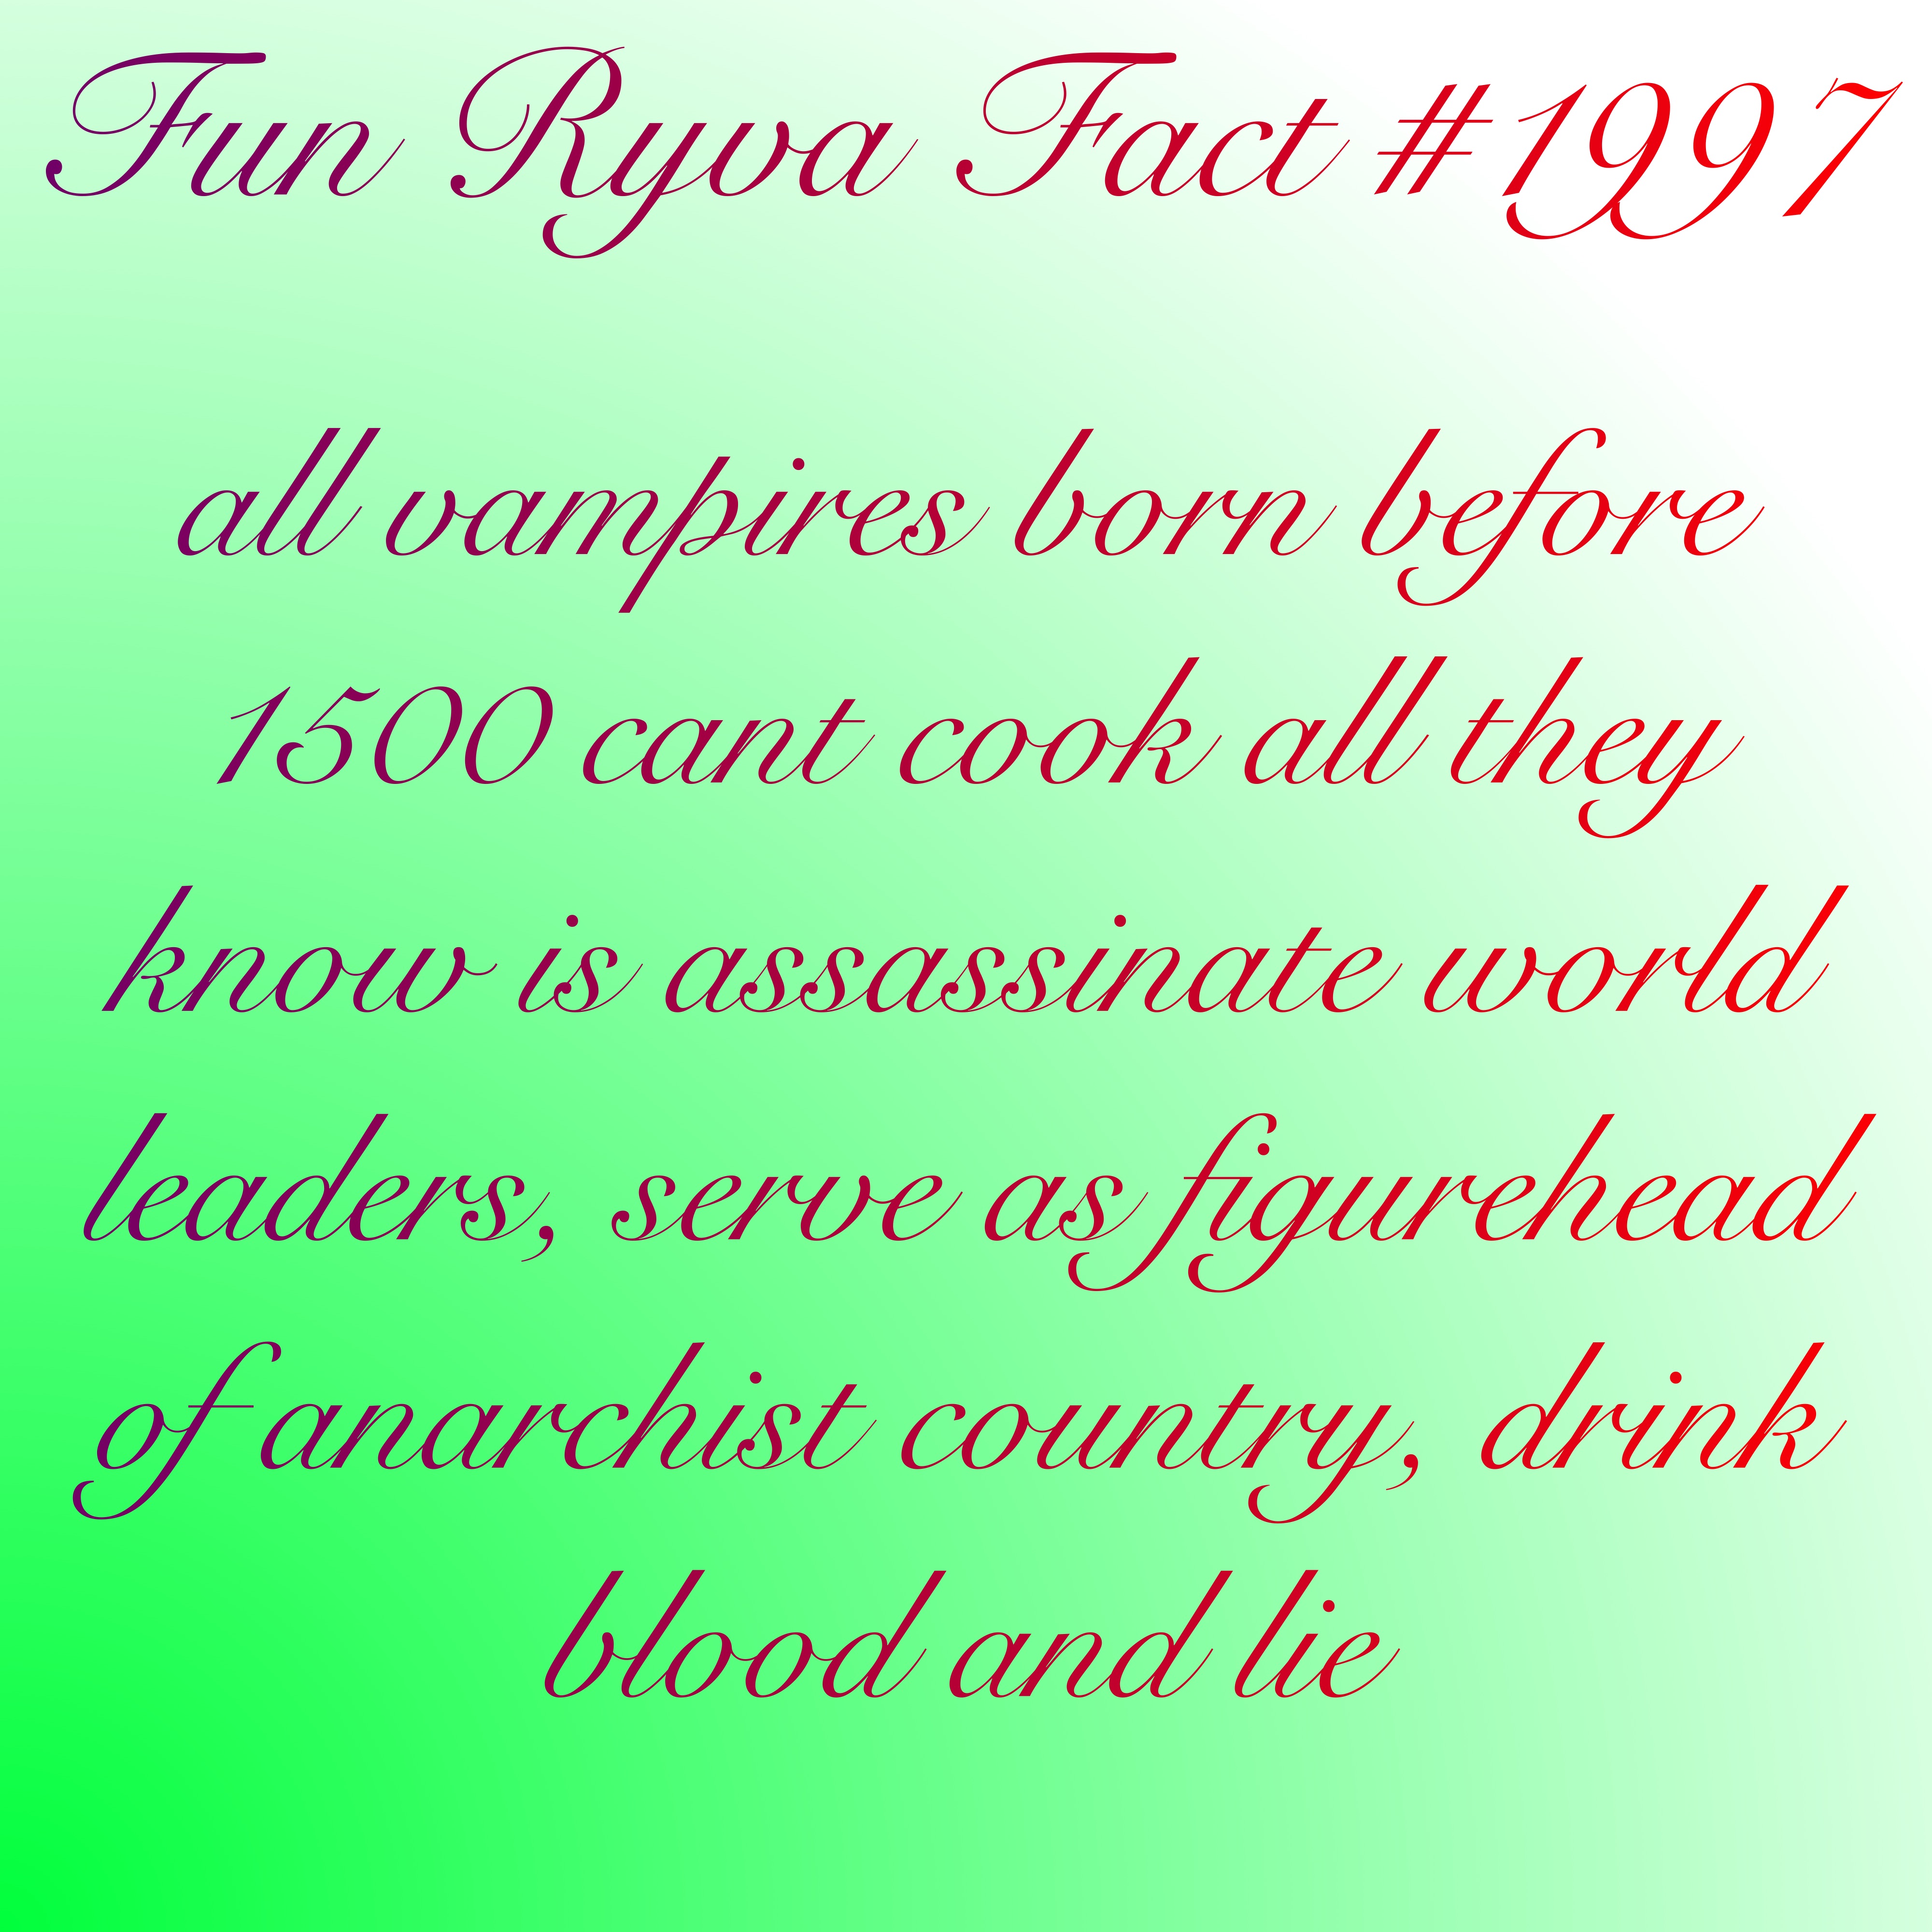 A meme reading "Fun Ryva Fact #1997" above text reading "all vampires born before 1500 cant cook all they know is assassinate world leaders, serve as figurehead of anarchist country, drink blood, and lie".